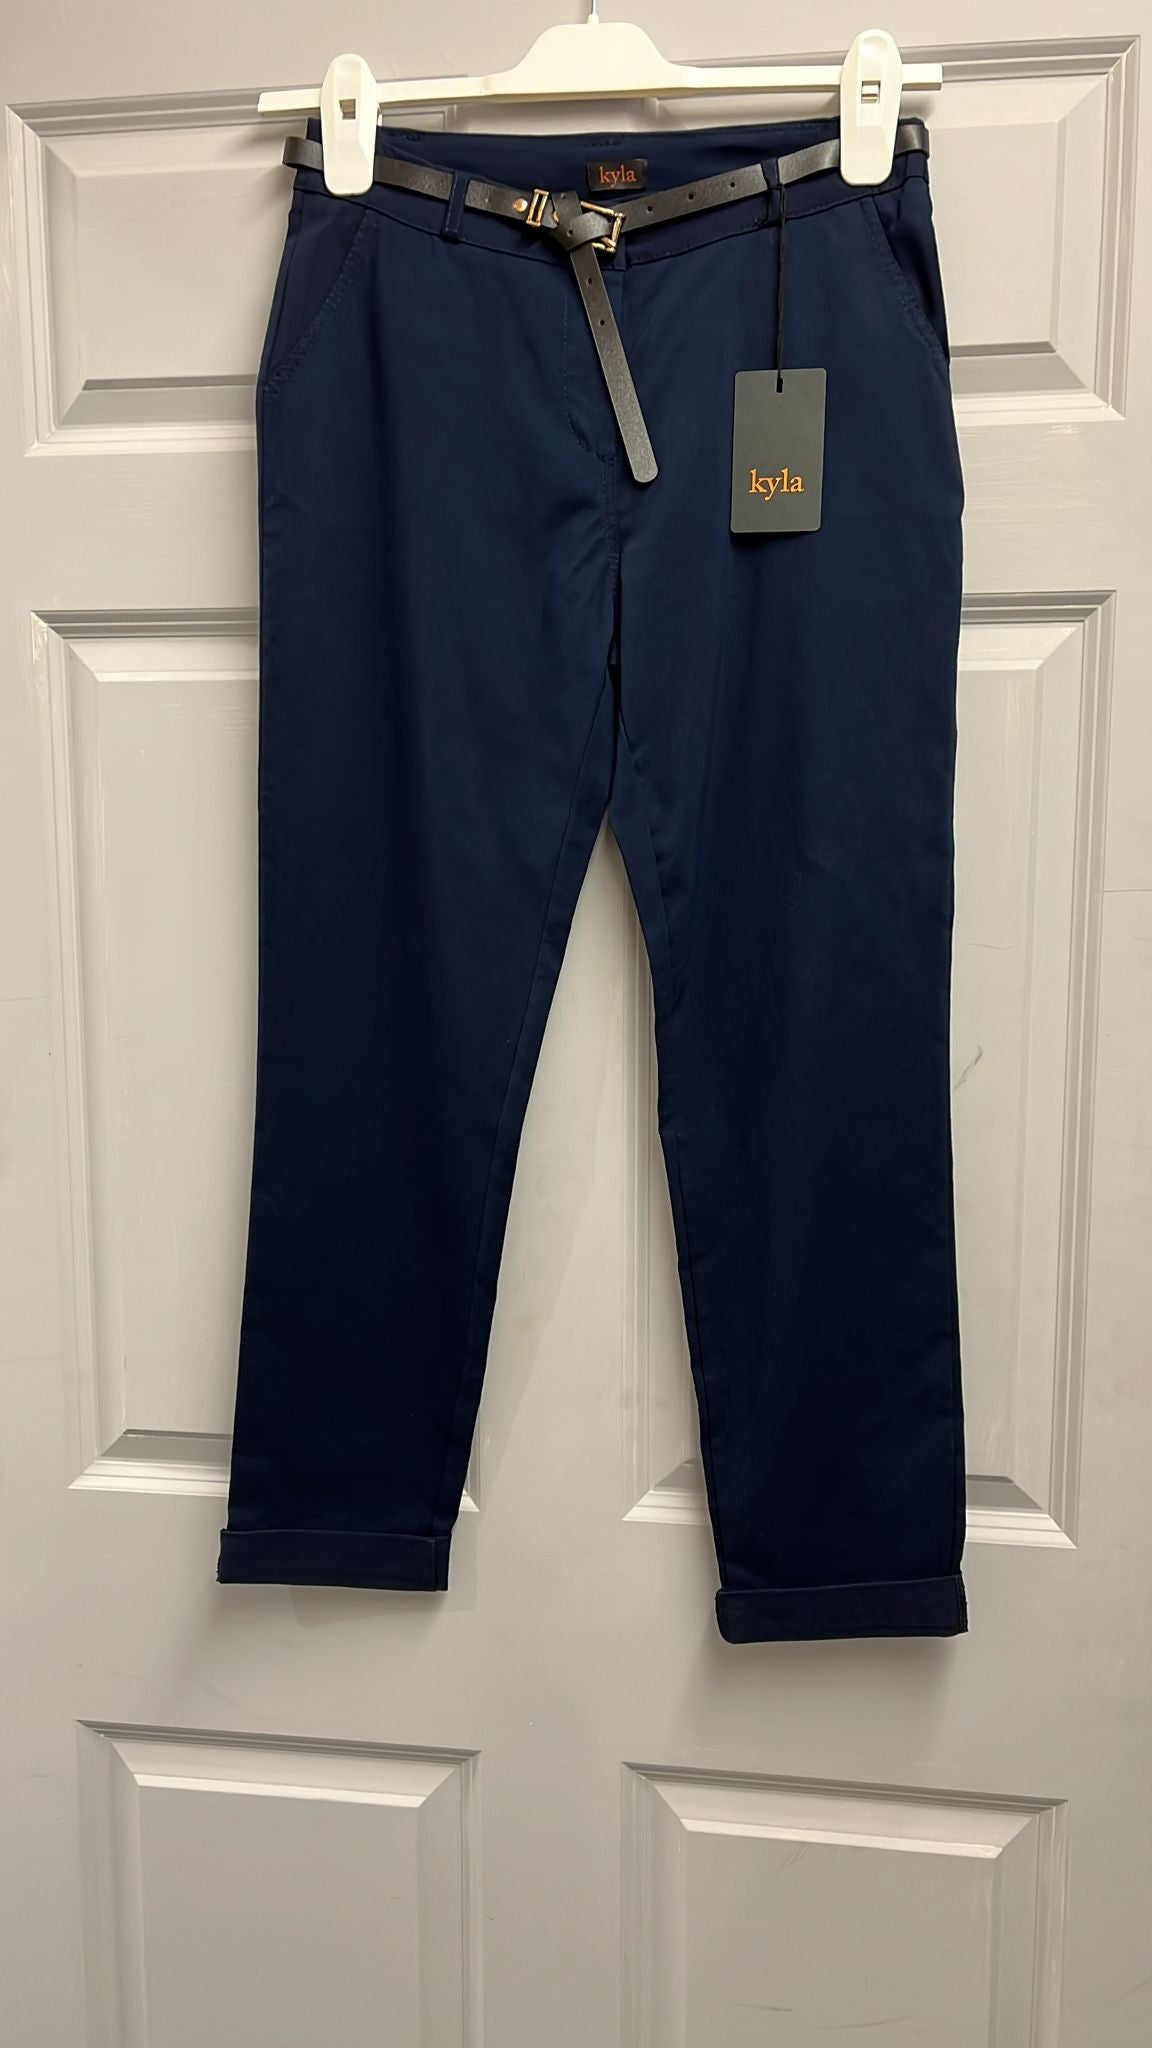 Kyla Trousers, 4 way stretch, pockets, turn up in Navy